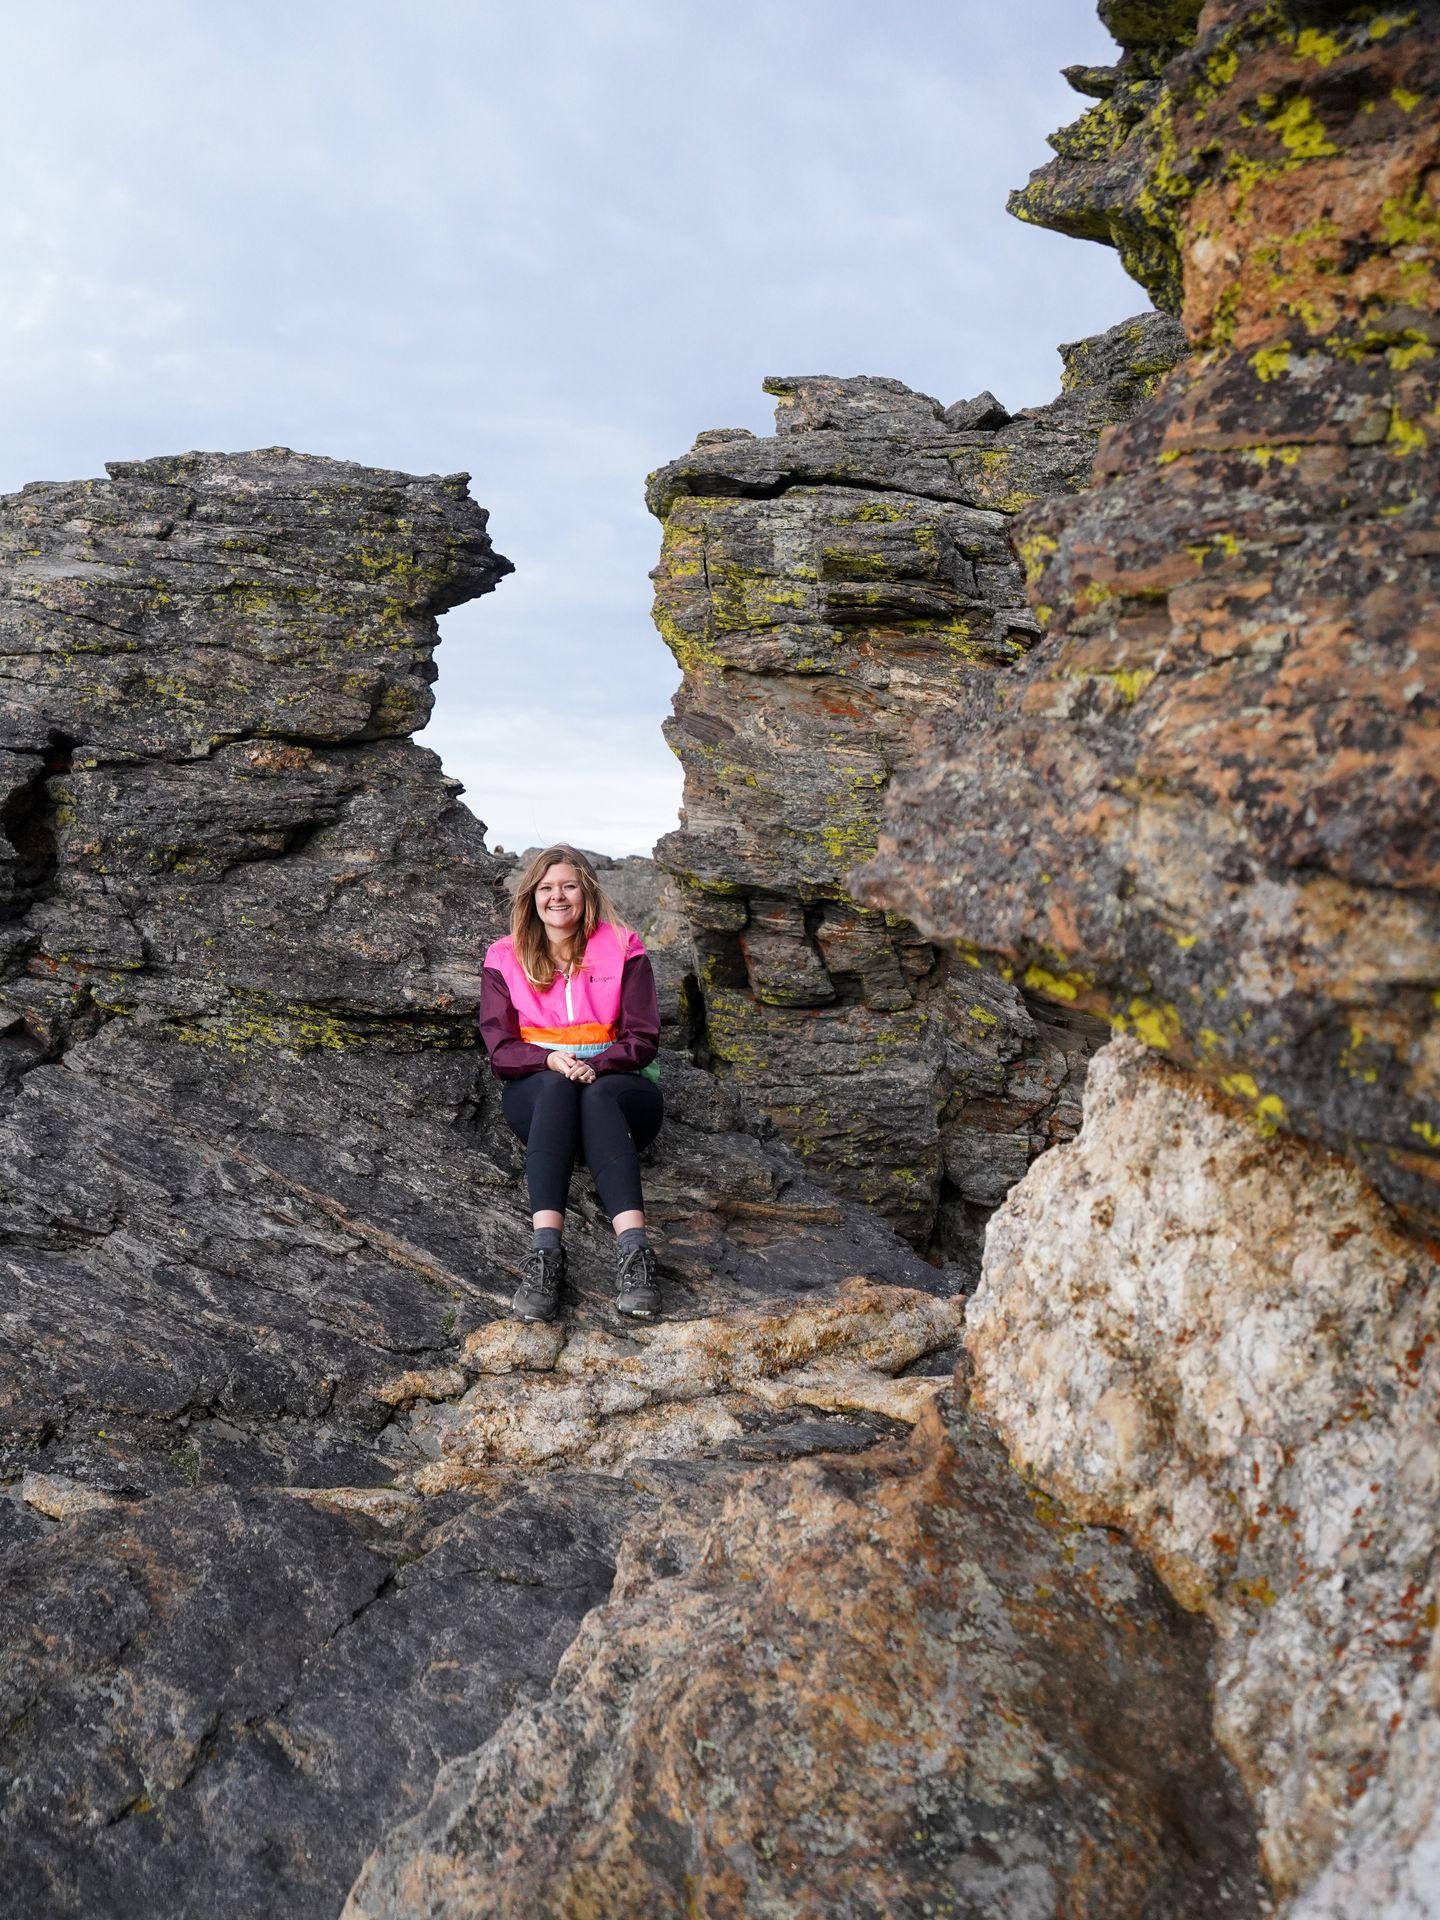 Lydia sitting on interesting rock formations along on Tundra Communities Trail.